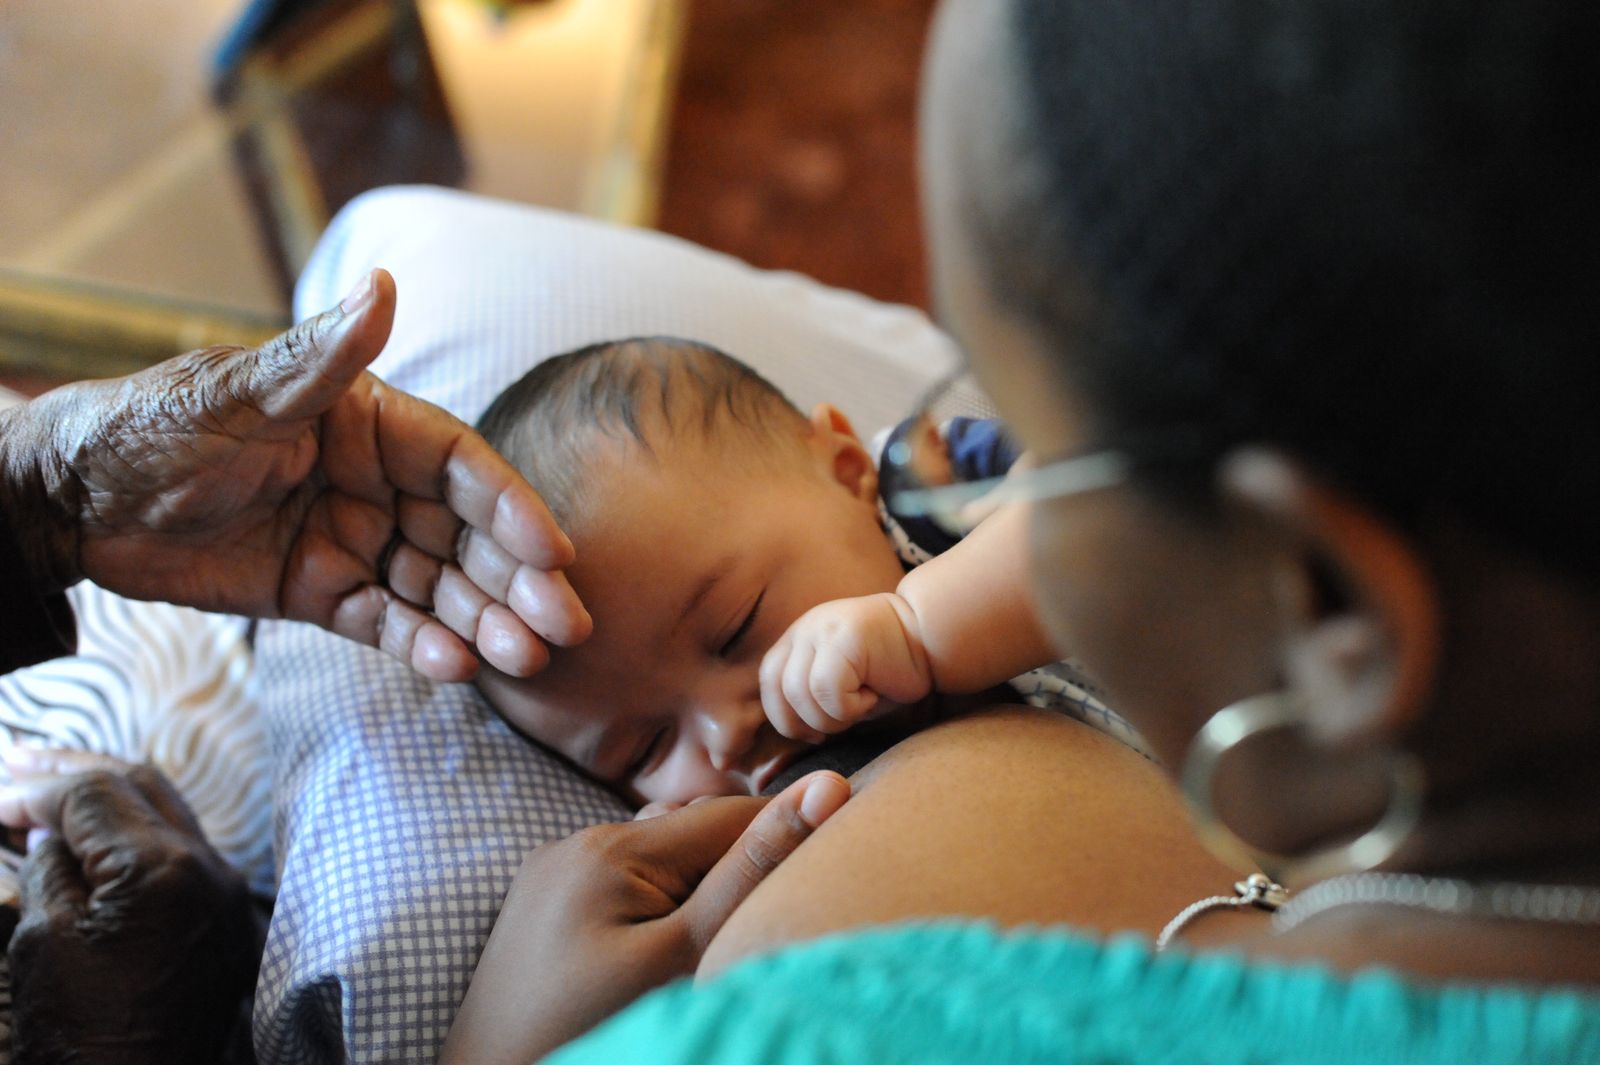 Black woman breastfeeding her infant, while older Black woman's hand rests on infant's forehead